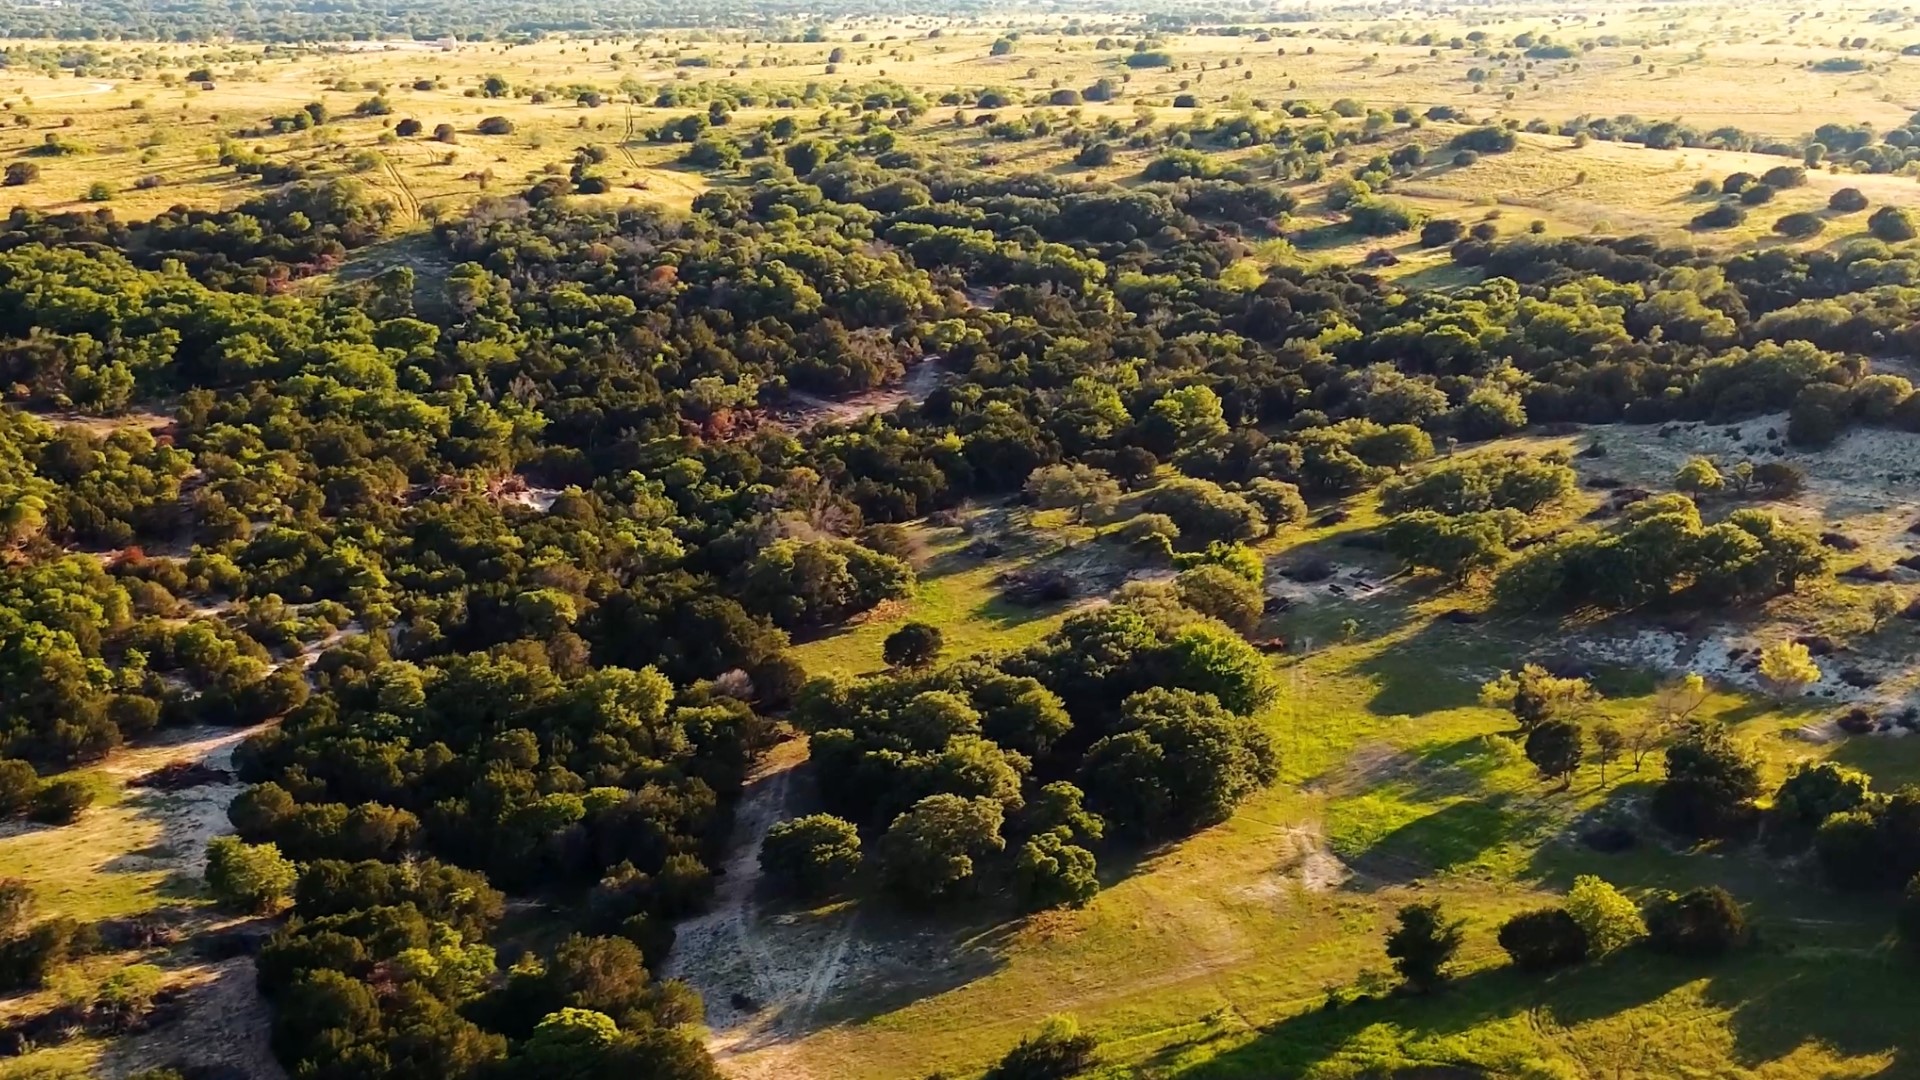 The course will be located in the 2,400-acre Kelly Ranch development, which is currently under construction along U.S. 377 in the Aledo area southwest of Fort Worth.